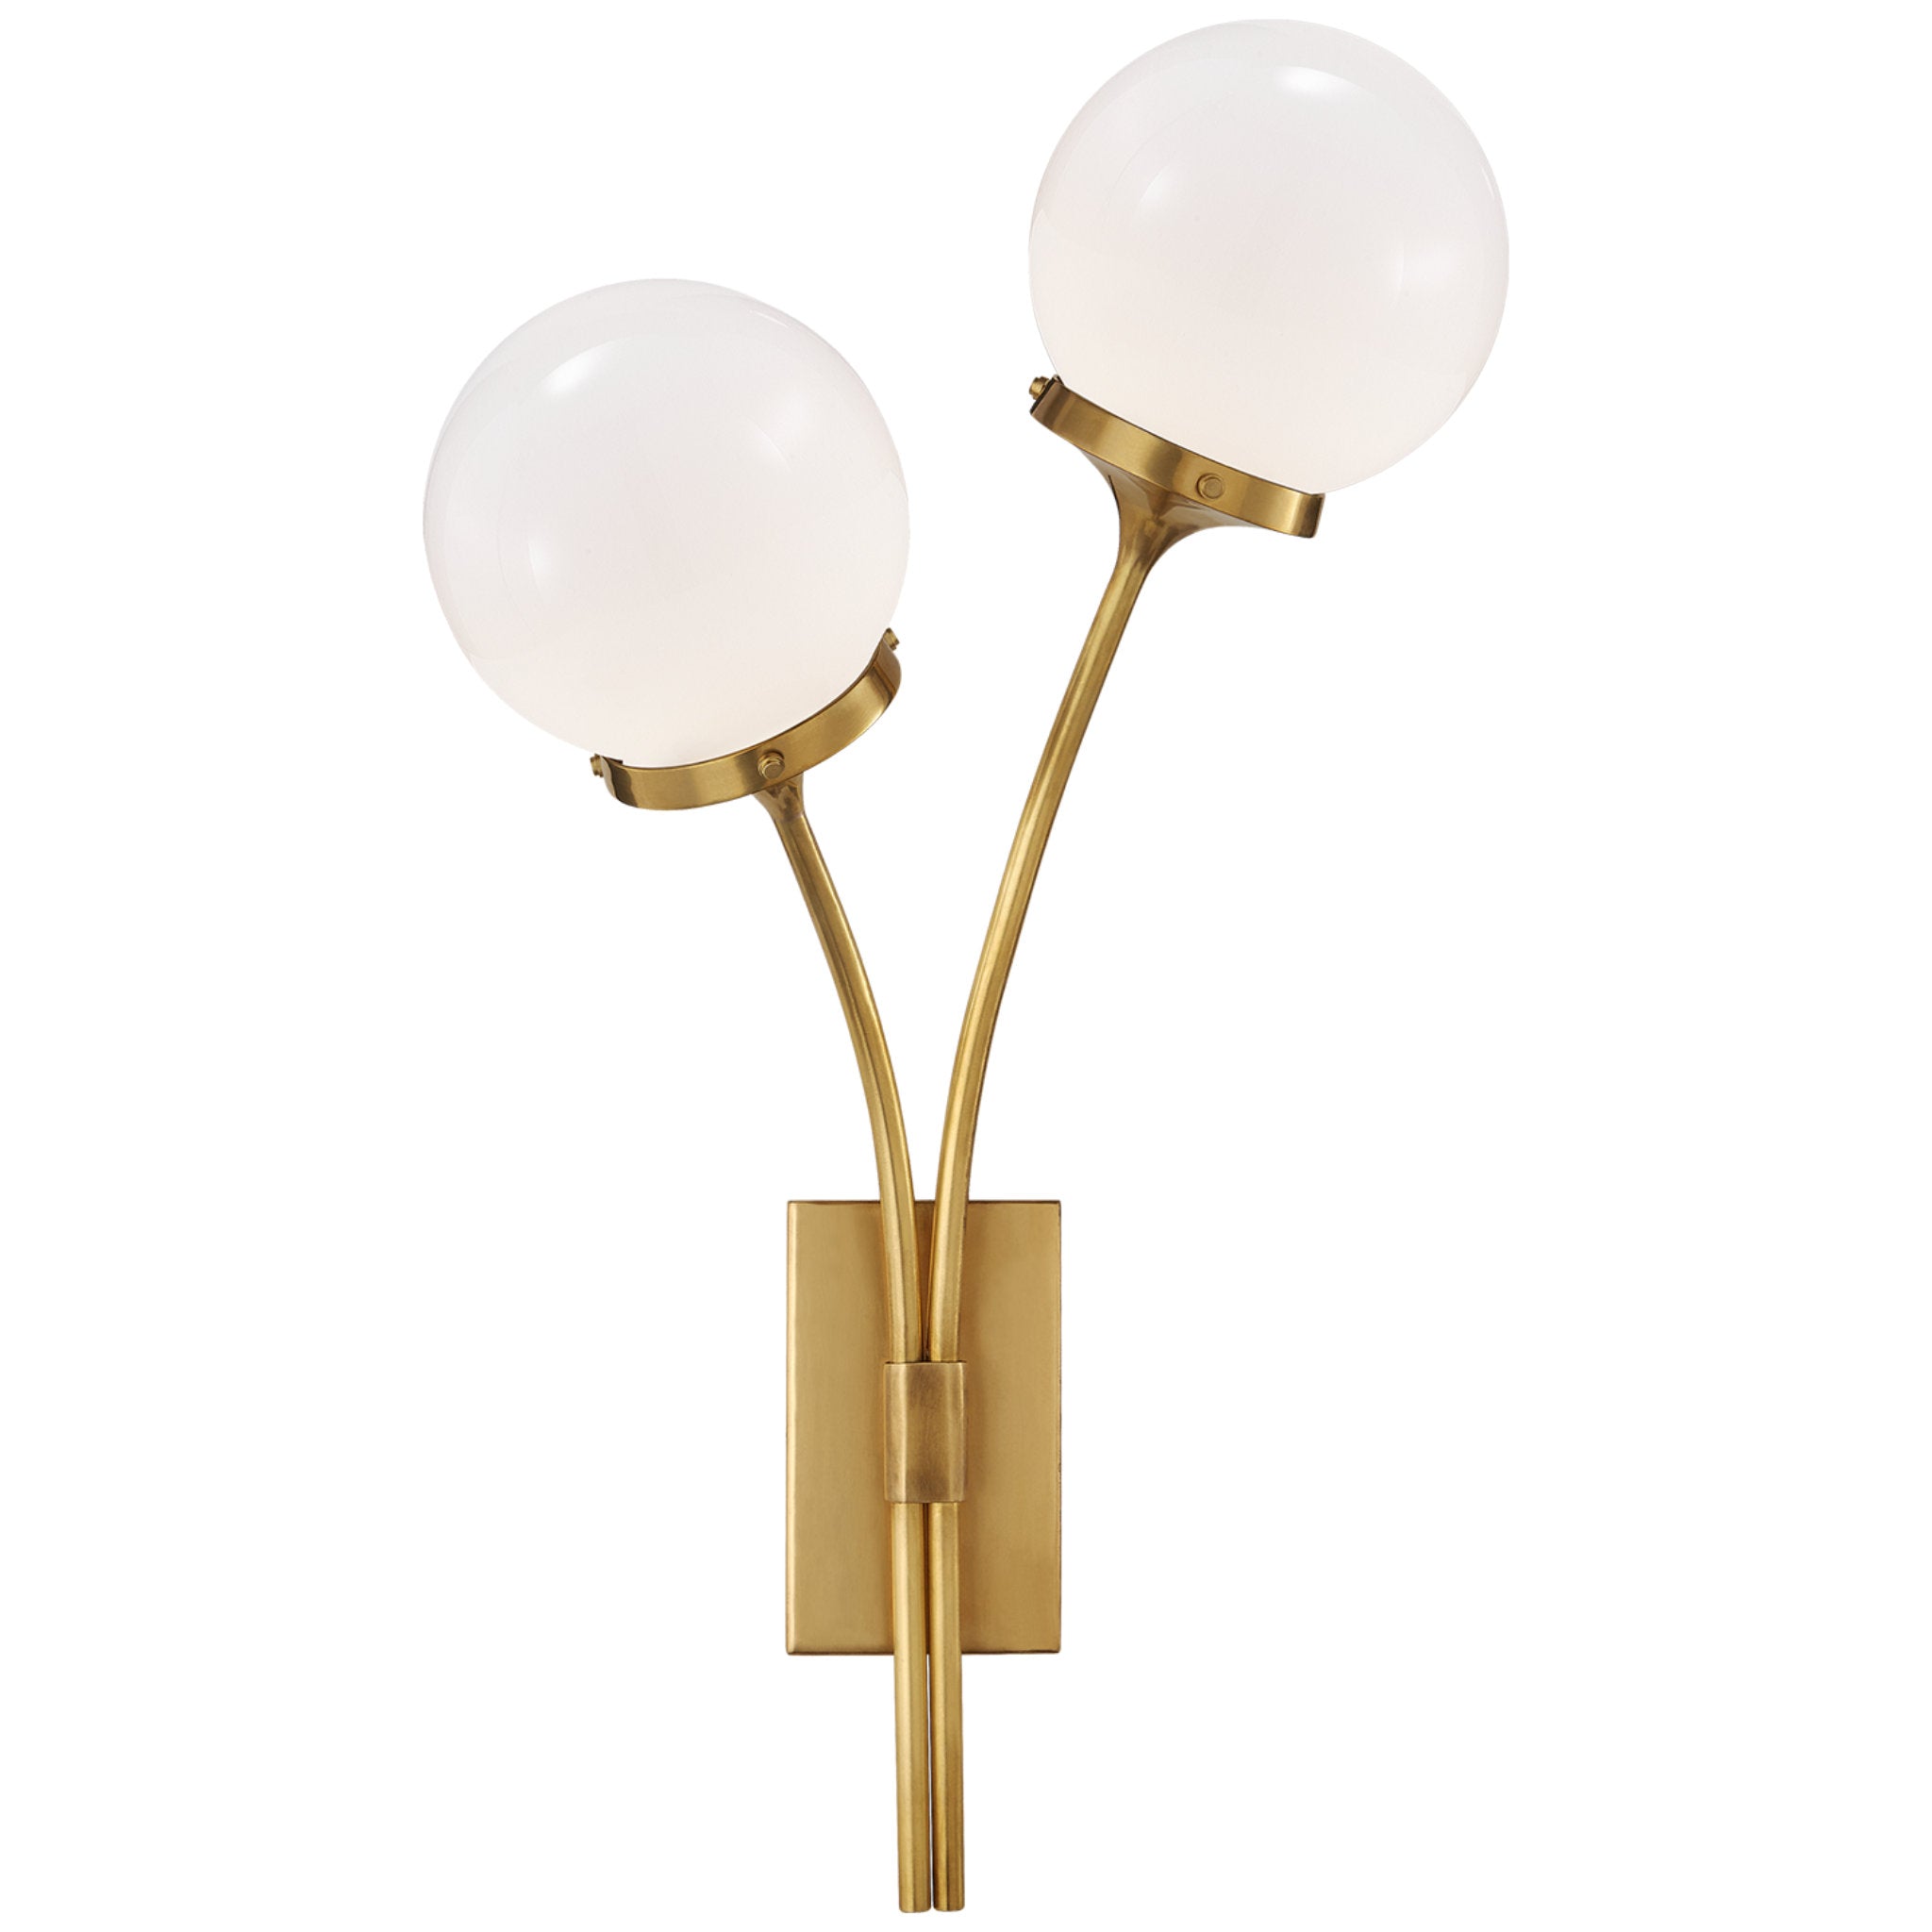 kate spade new york Prescott Left Sconce in Soft Brass with White Glass